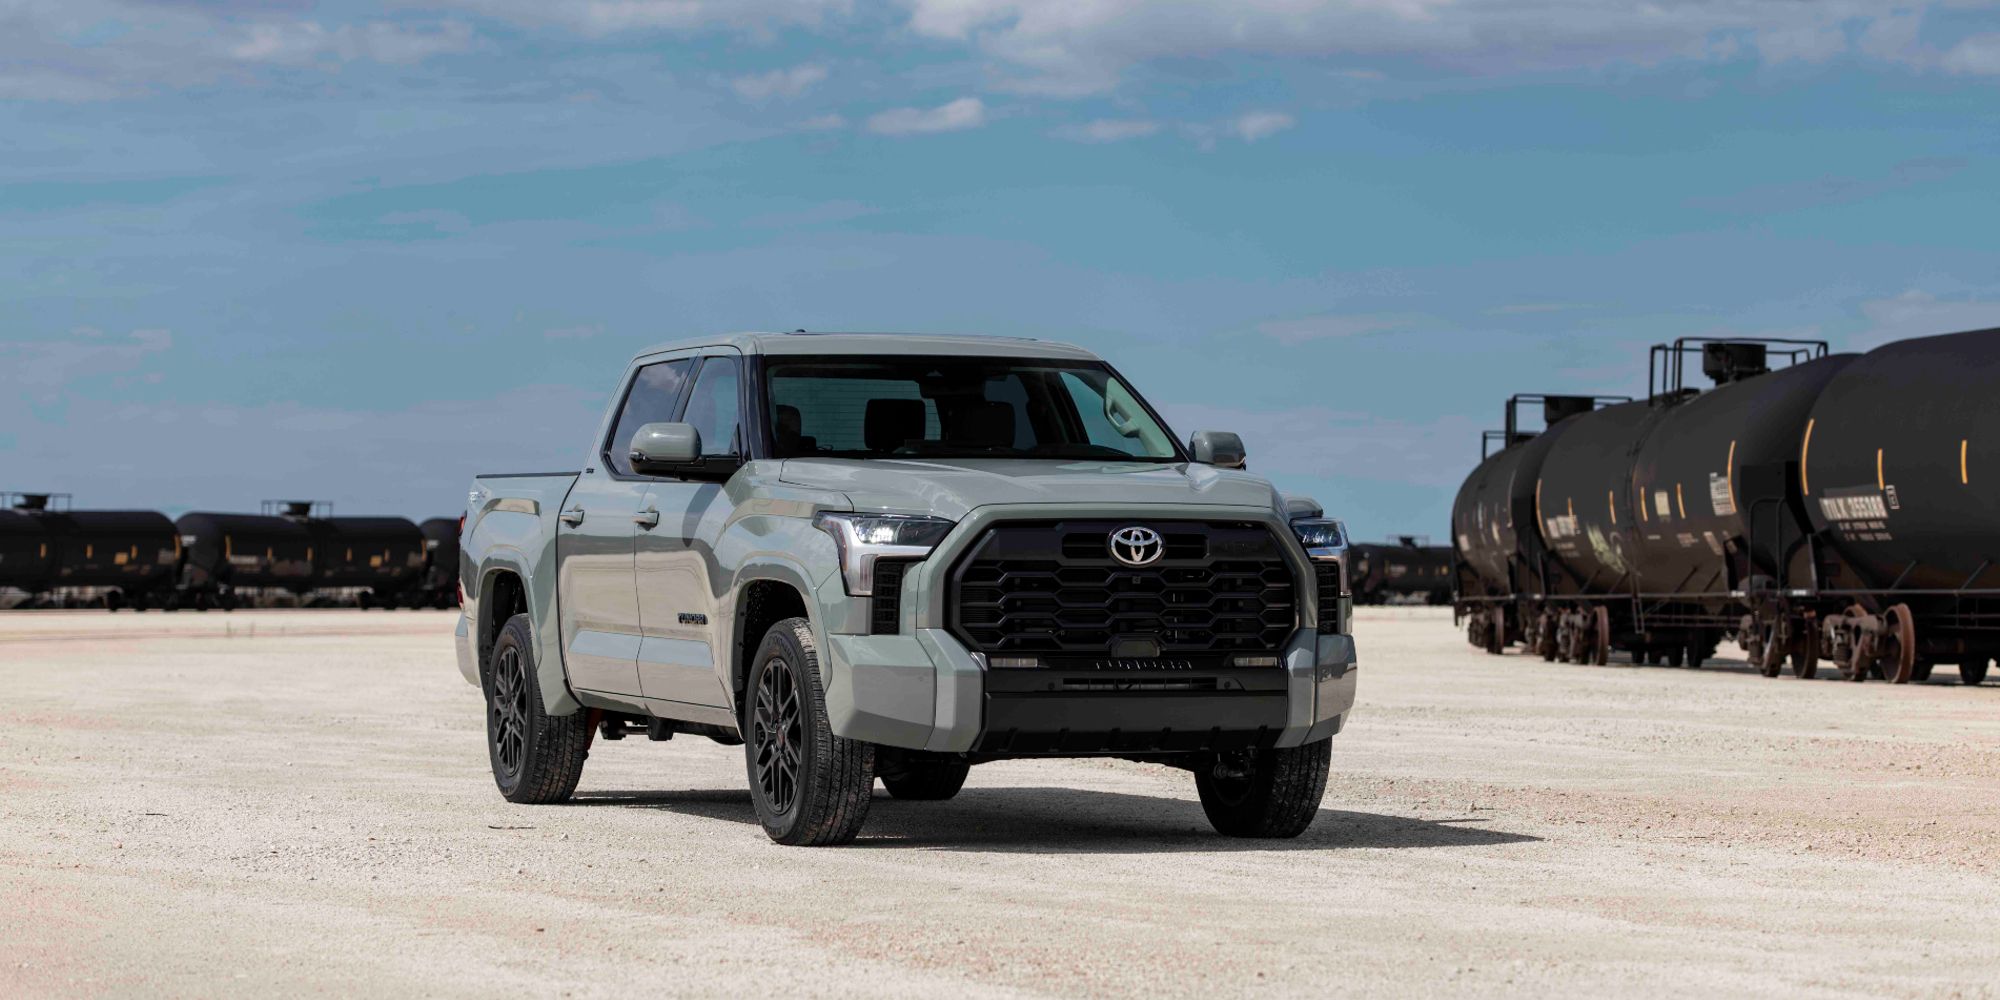 The front of the Tundra TRD Sport